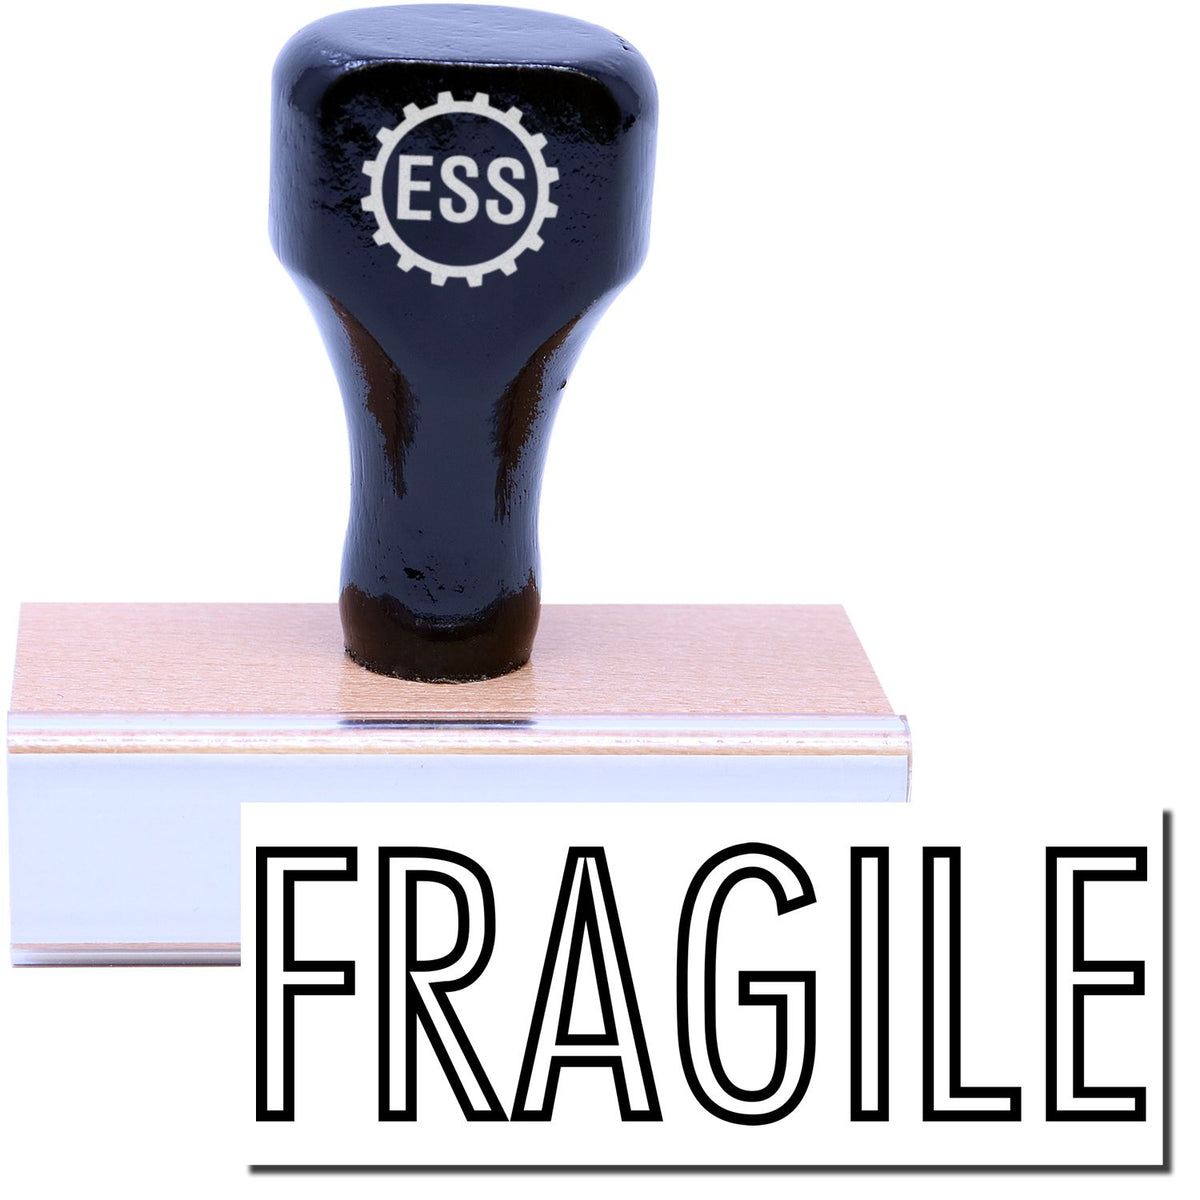 A stock office rubber stamp with a stamped image showing how the text &quot;FRAGILE&quot; in an outline font is displayed after stamping.